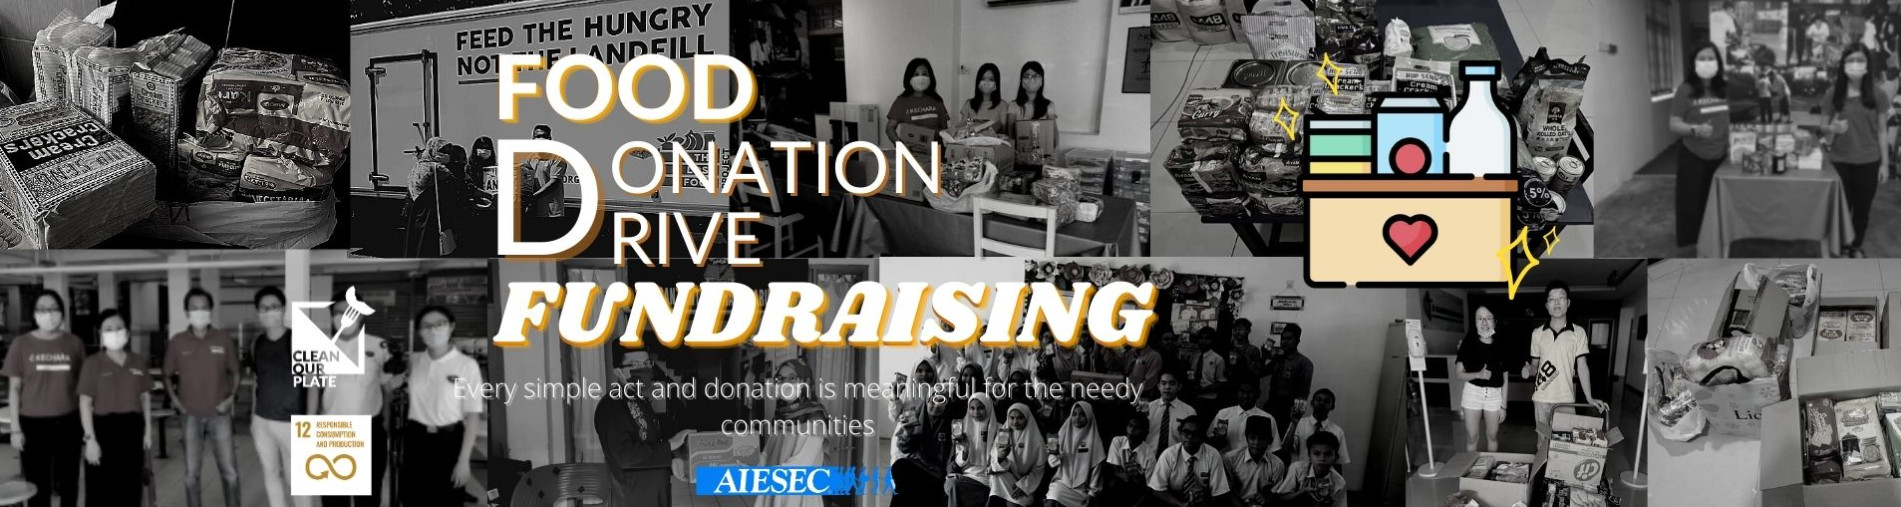 Food Donation Drive Fundraising Sub-campaign